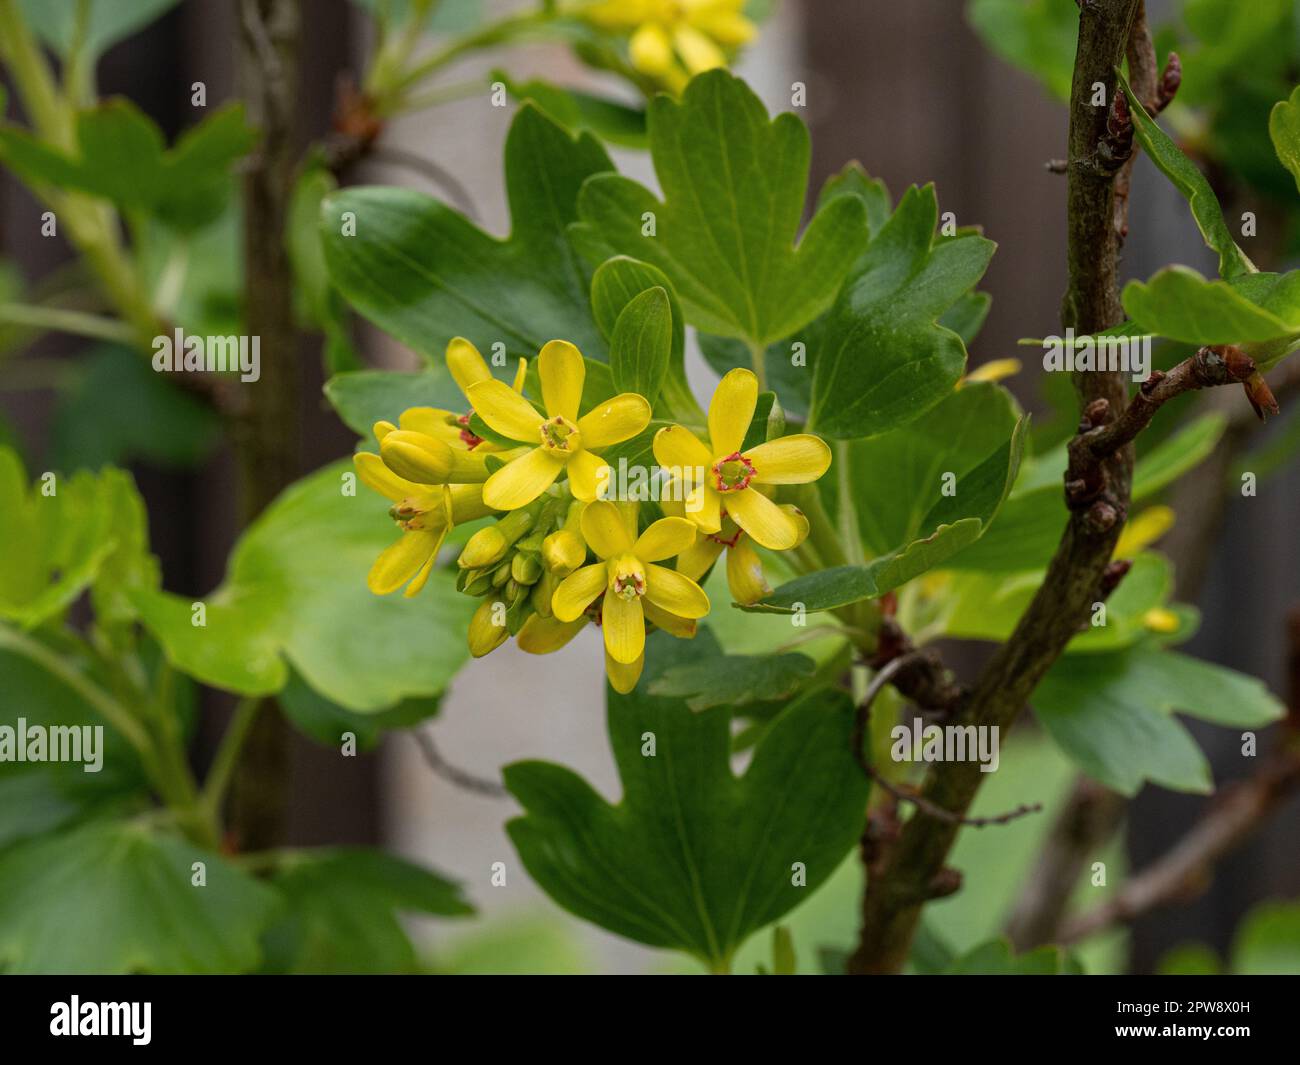 The bright yellow flowers of the flowering currant Ribes odoratum Stock Photo